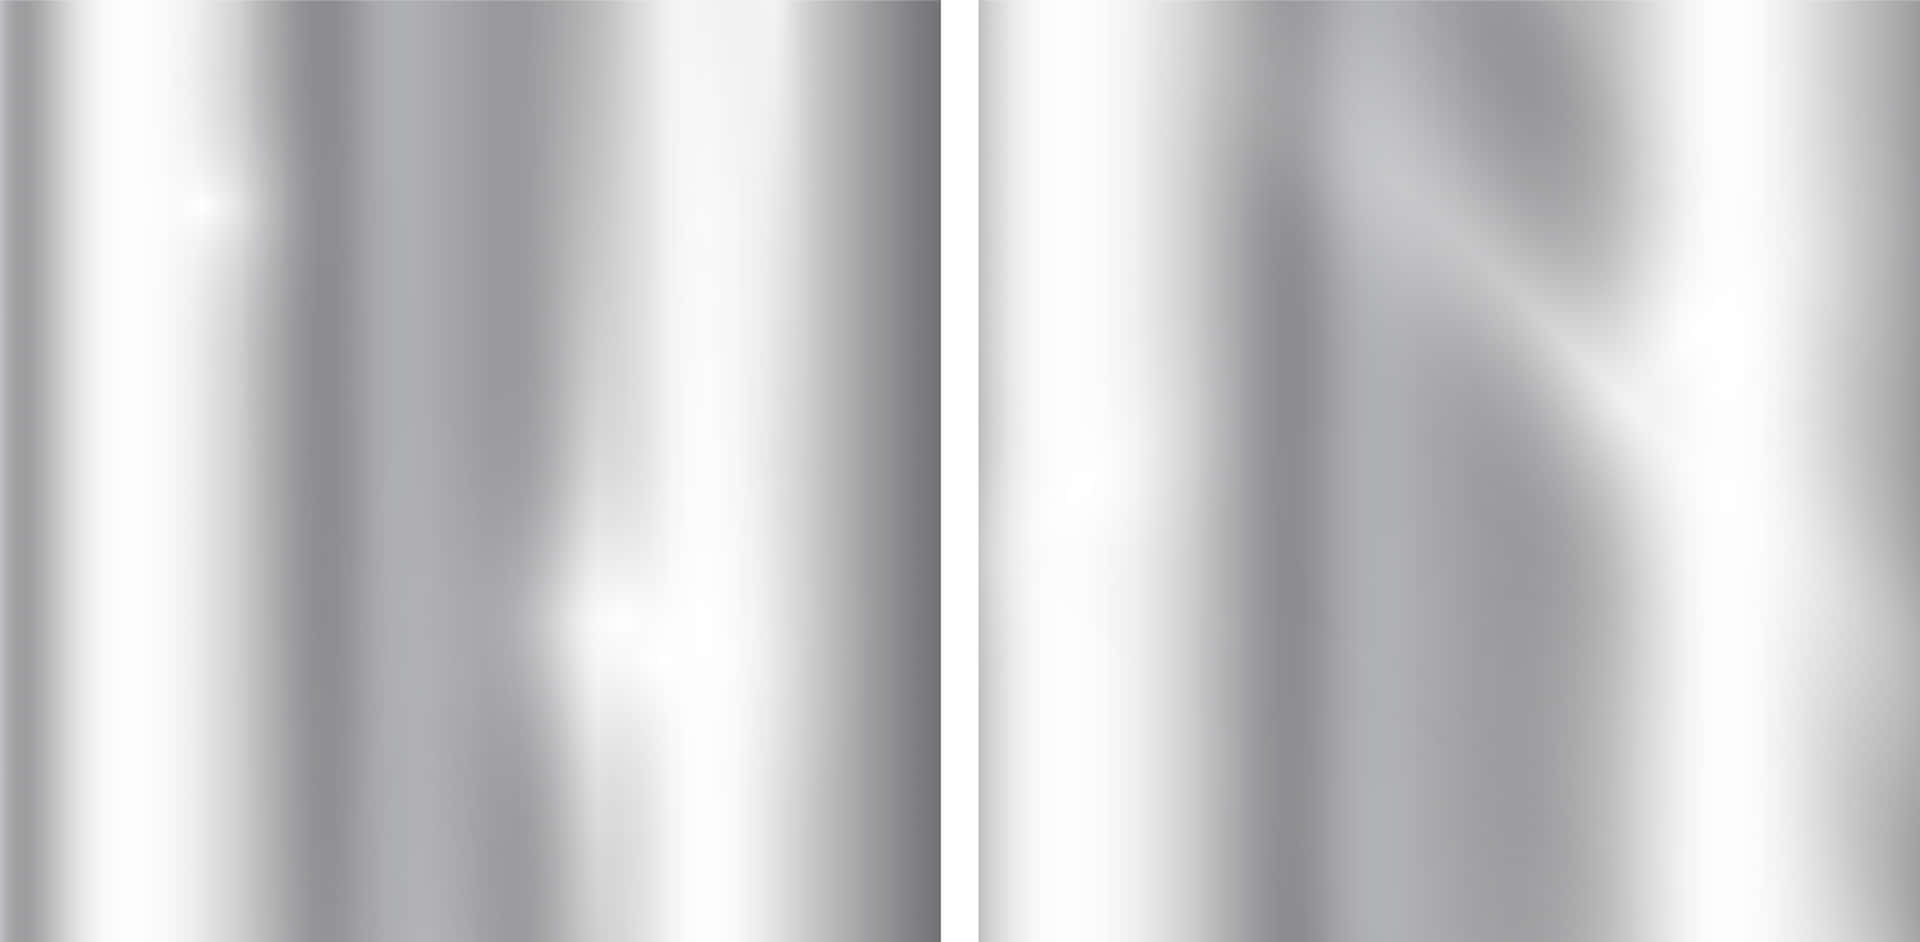 Two Silver Curtains With A White Background